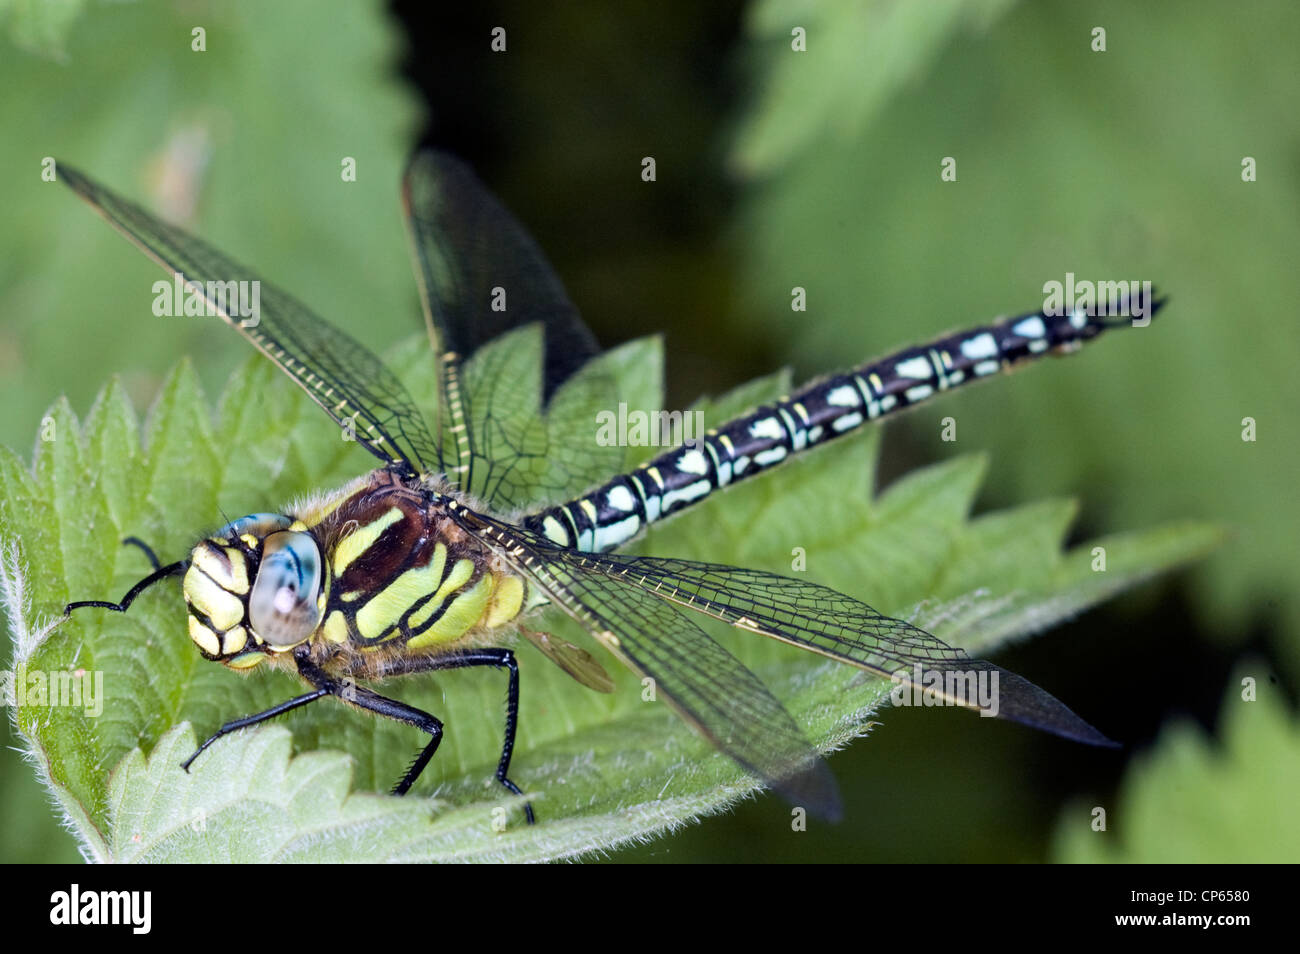 Emperor dragonfly warming up on nettle. Stock Photo